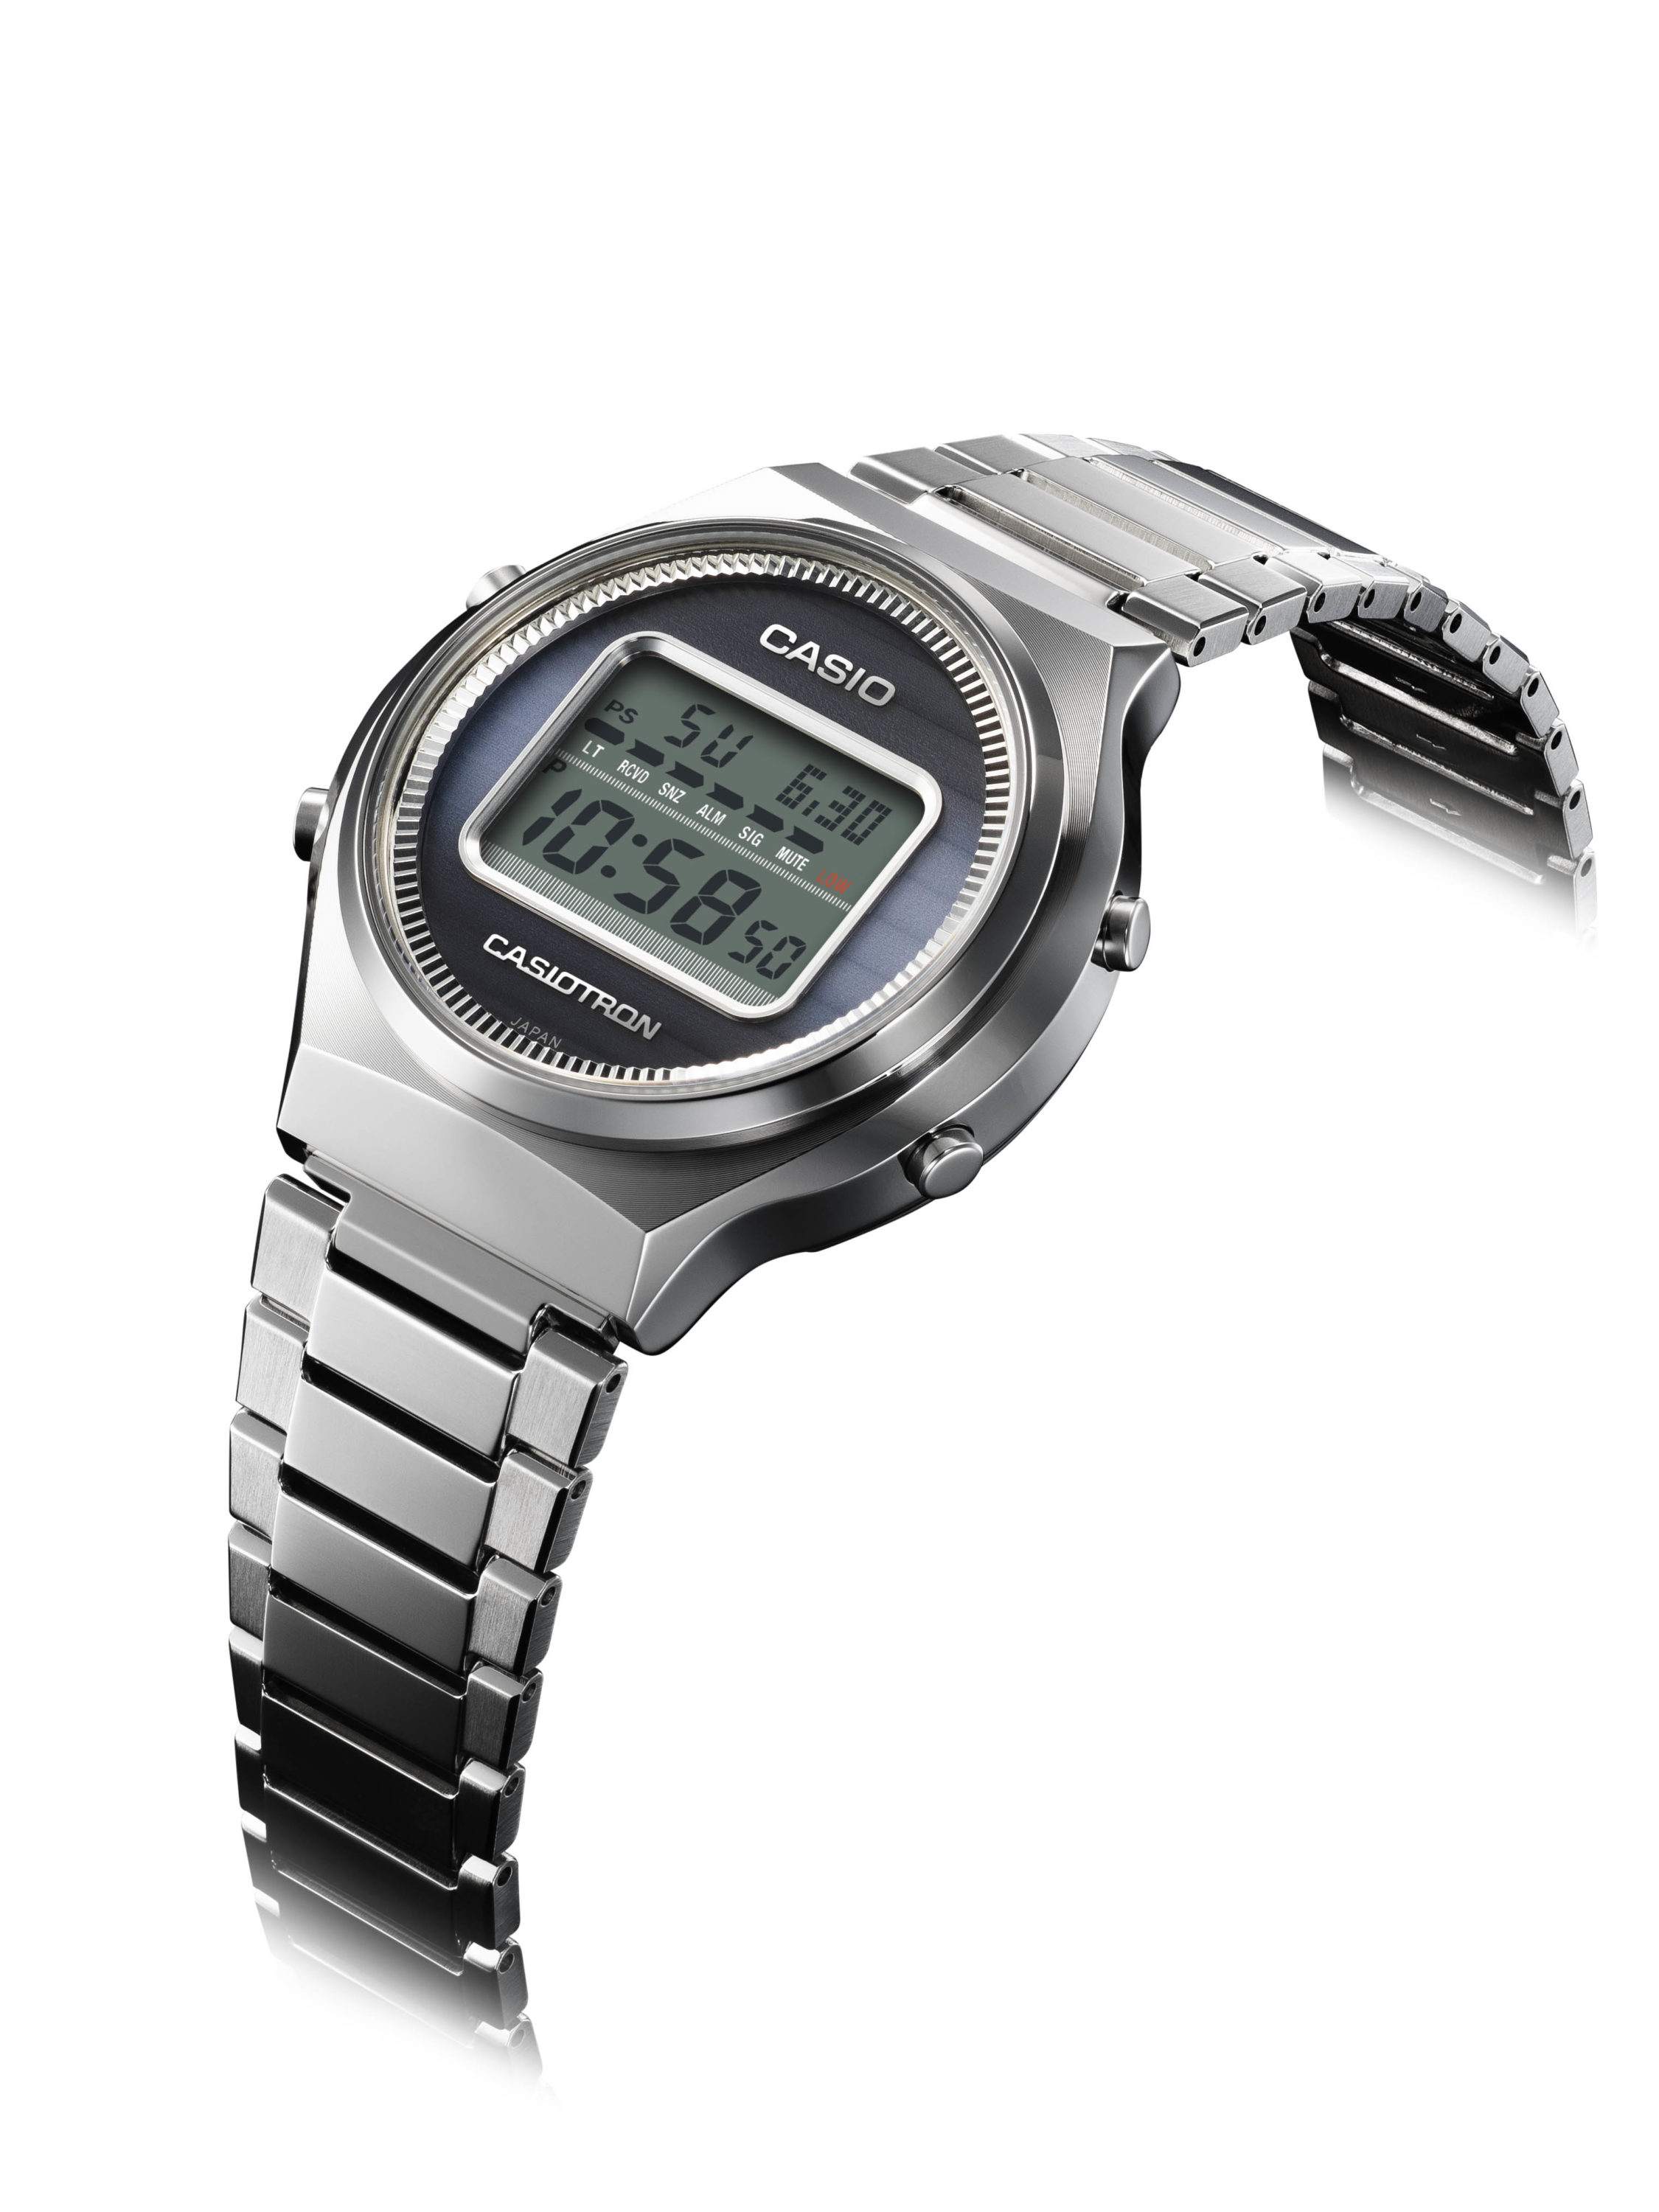 Casio Celebrates 50th Anniversary with New Limited Casiotron Edition